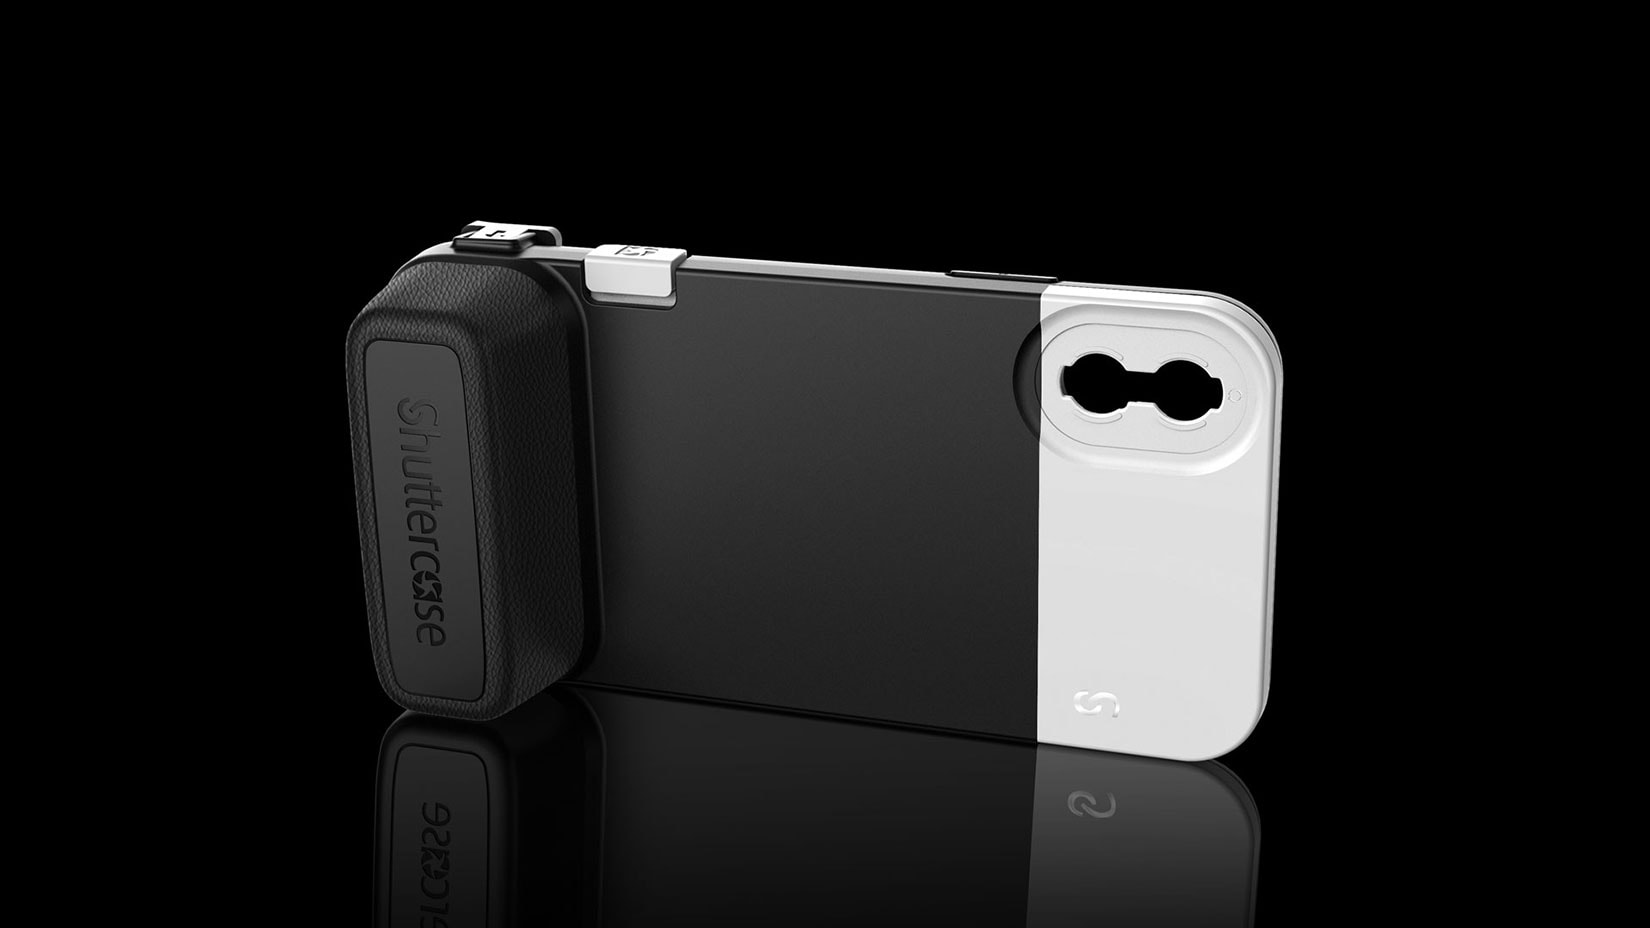 Shuttercase photo case for iPhone